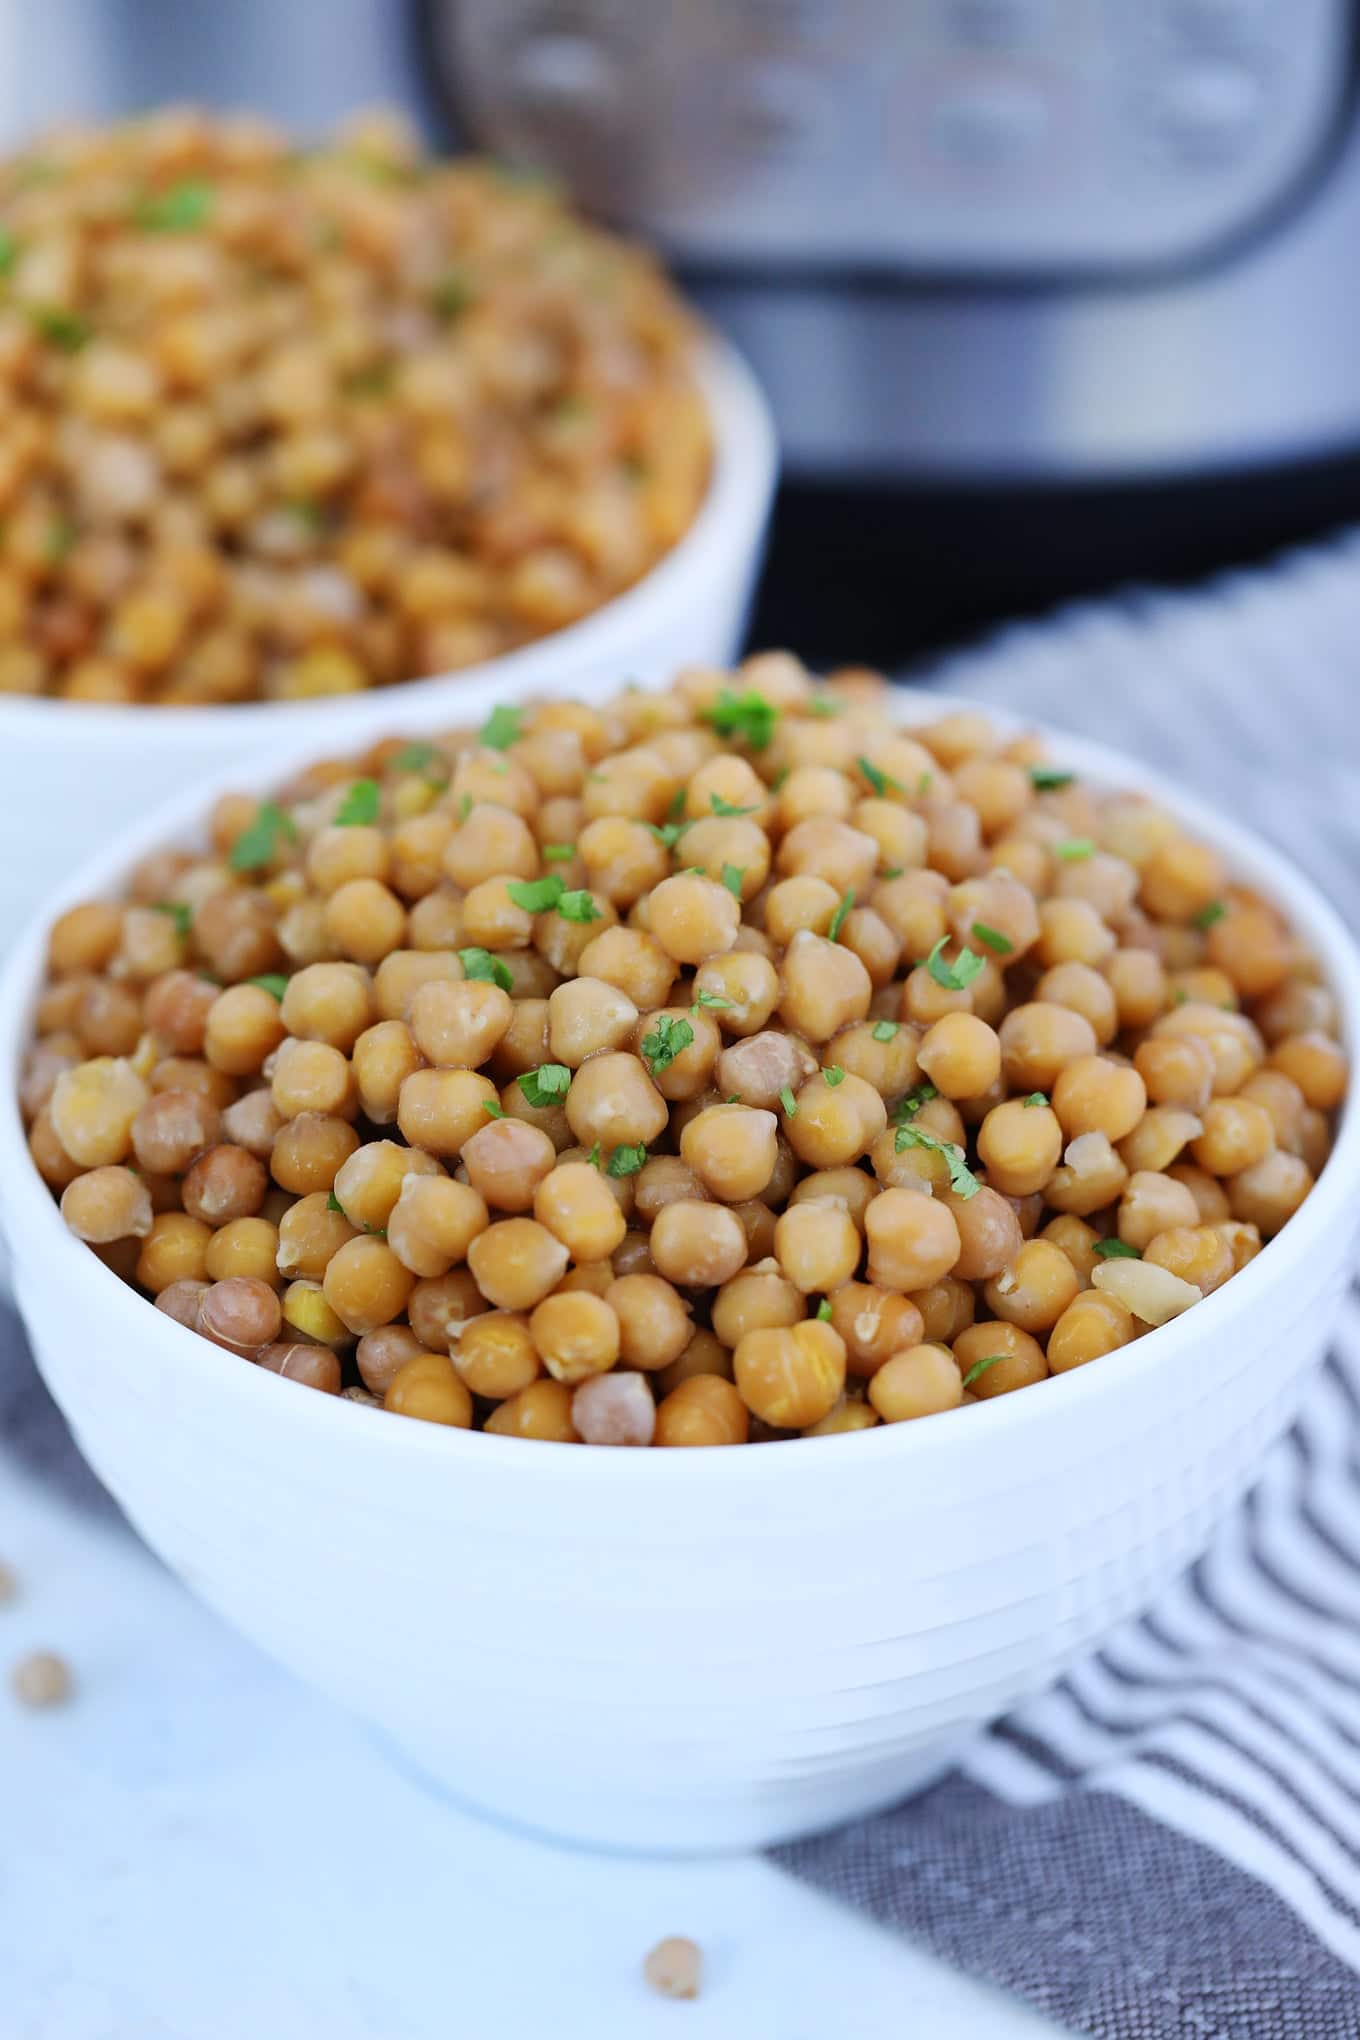 How To Cook Chickpeas Overnight [Instant Pot Mini]